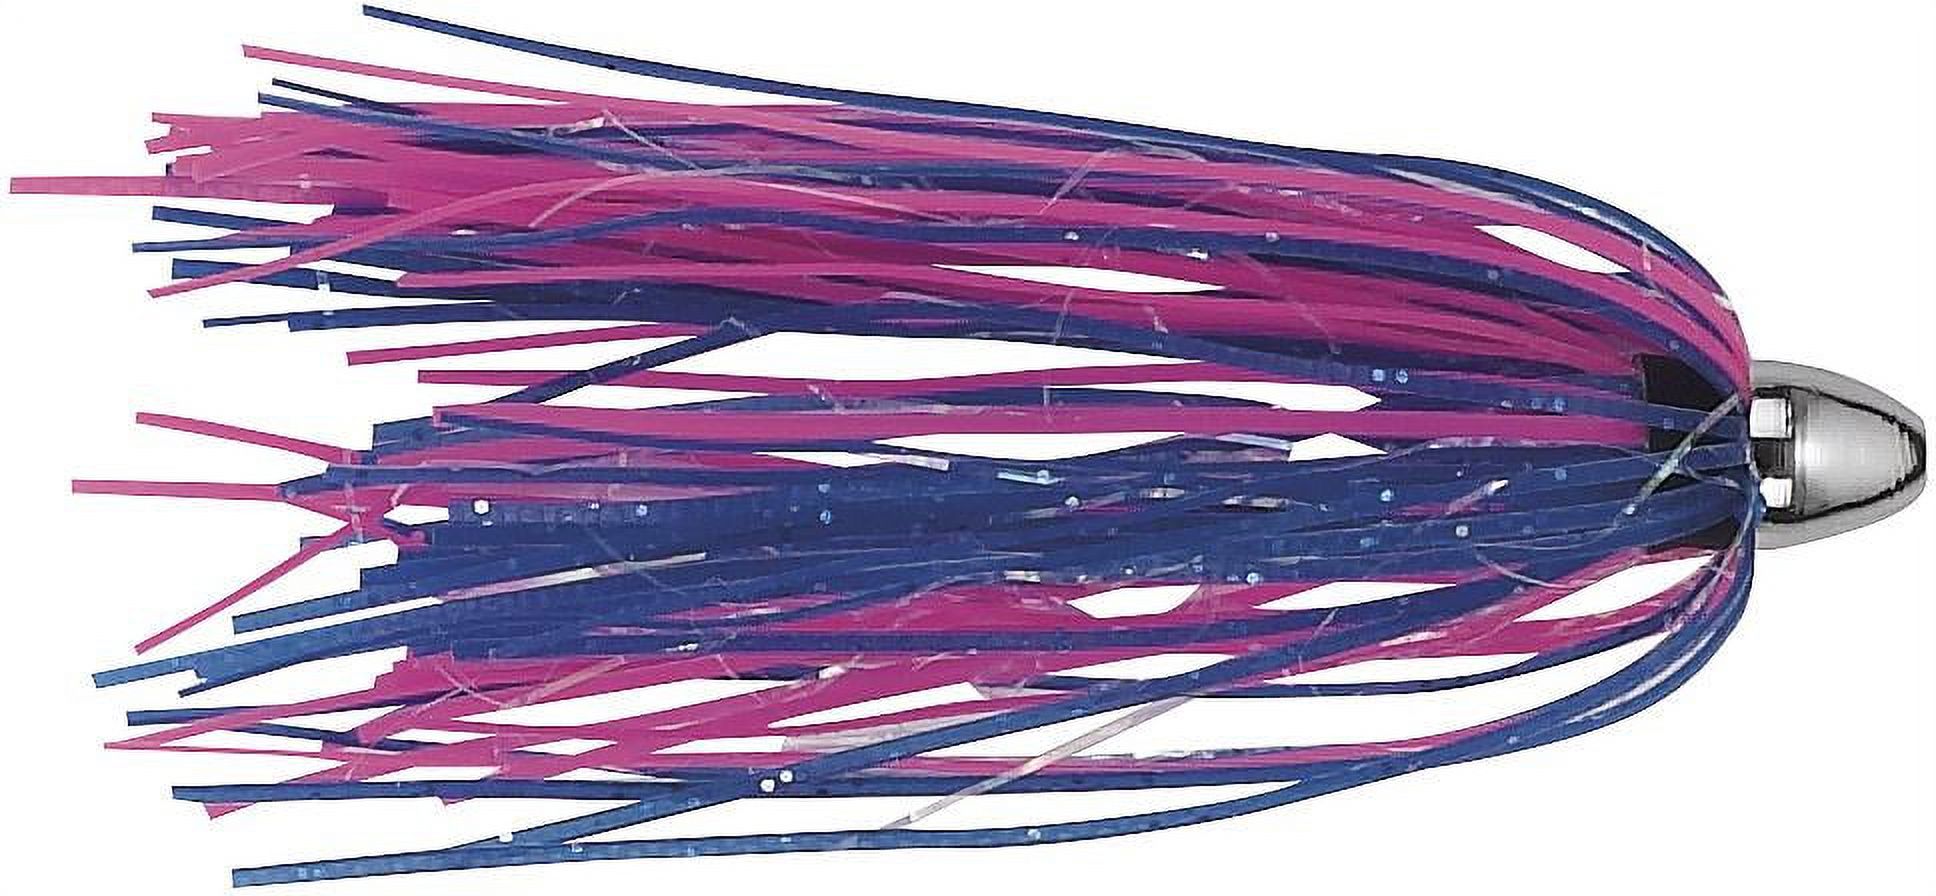 Boone 00130 Duster 3 Pk Blue And Pink/Mylar 2 1/2"--1/8 Oz - image 1 of 1